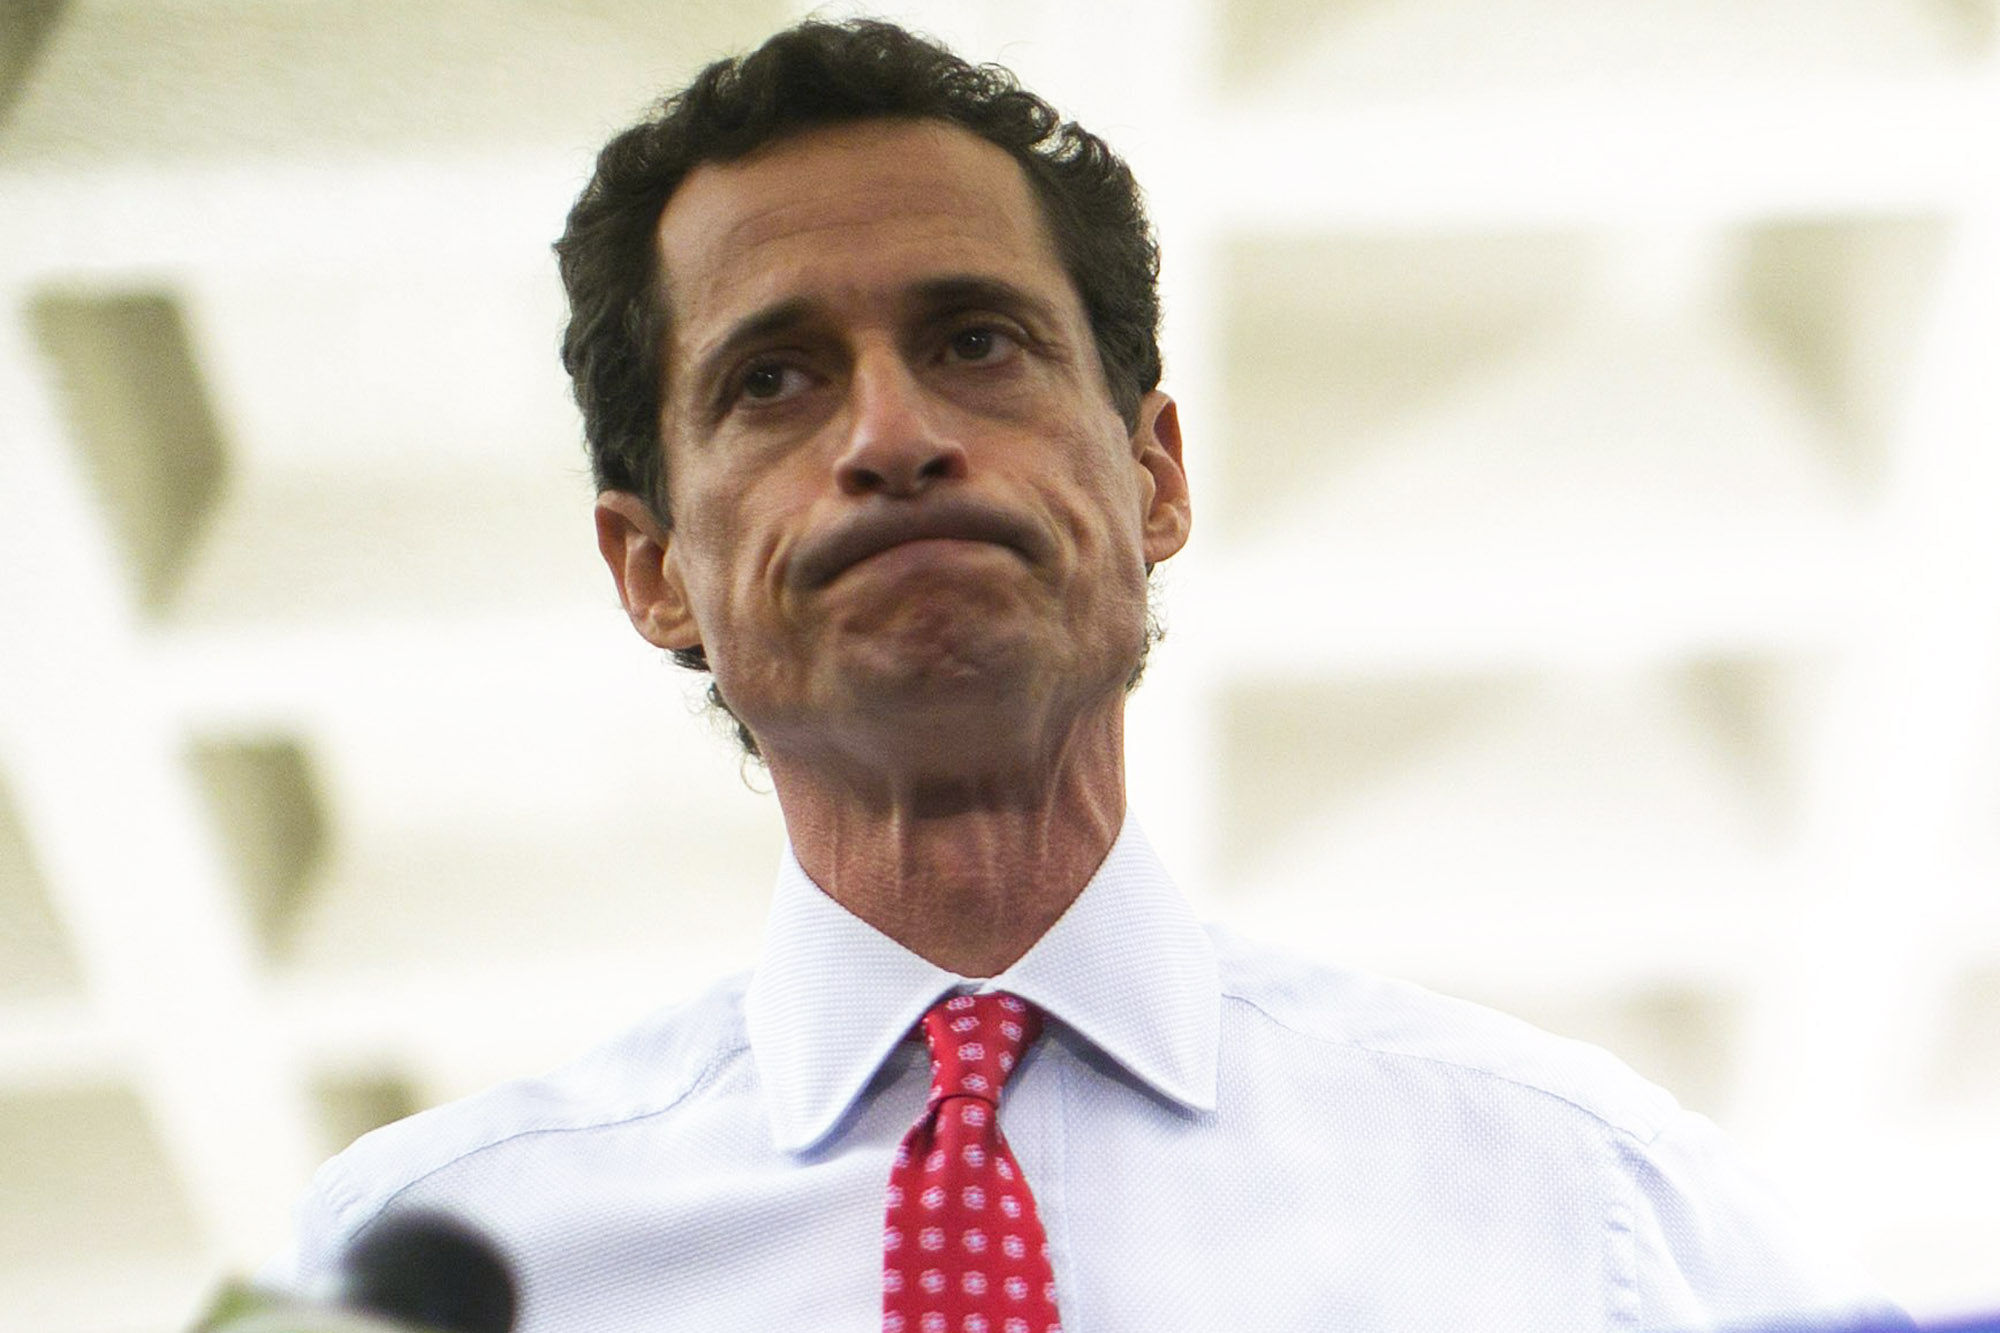 Anthony Weiner to make cameo in 'Alpha House'